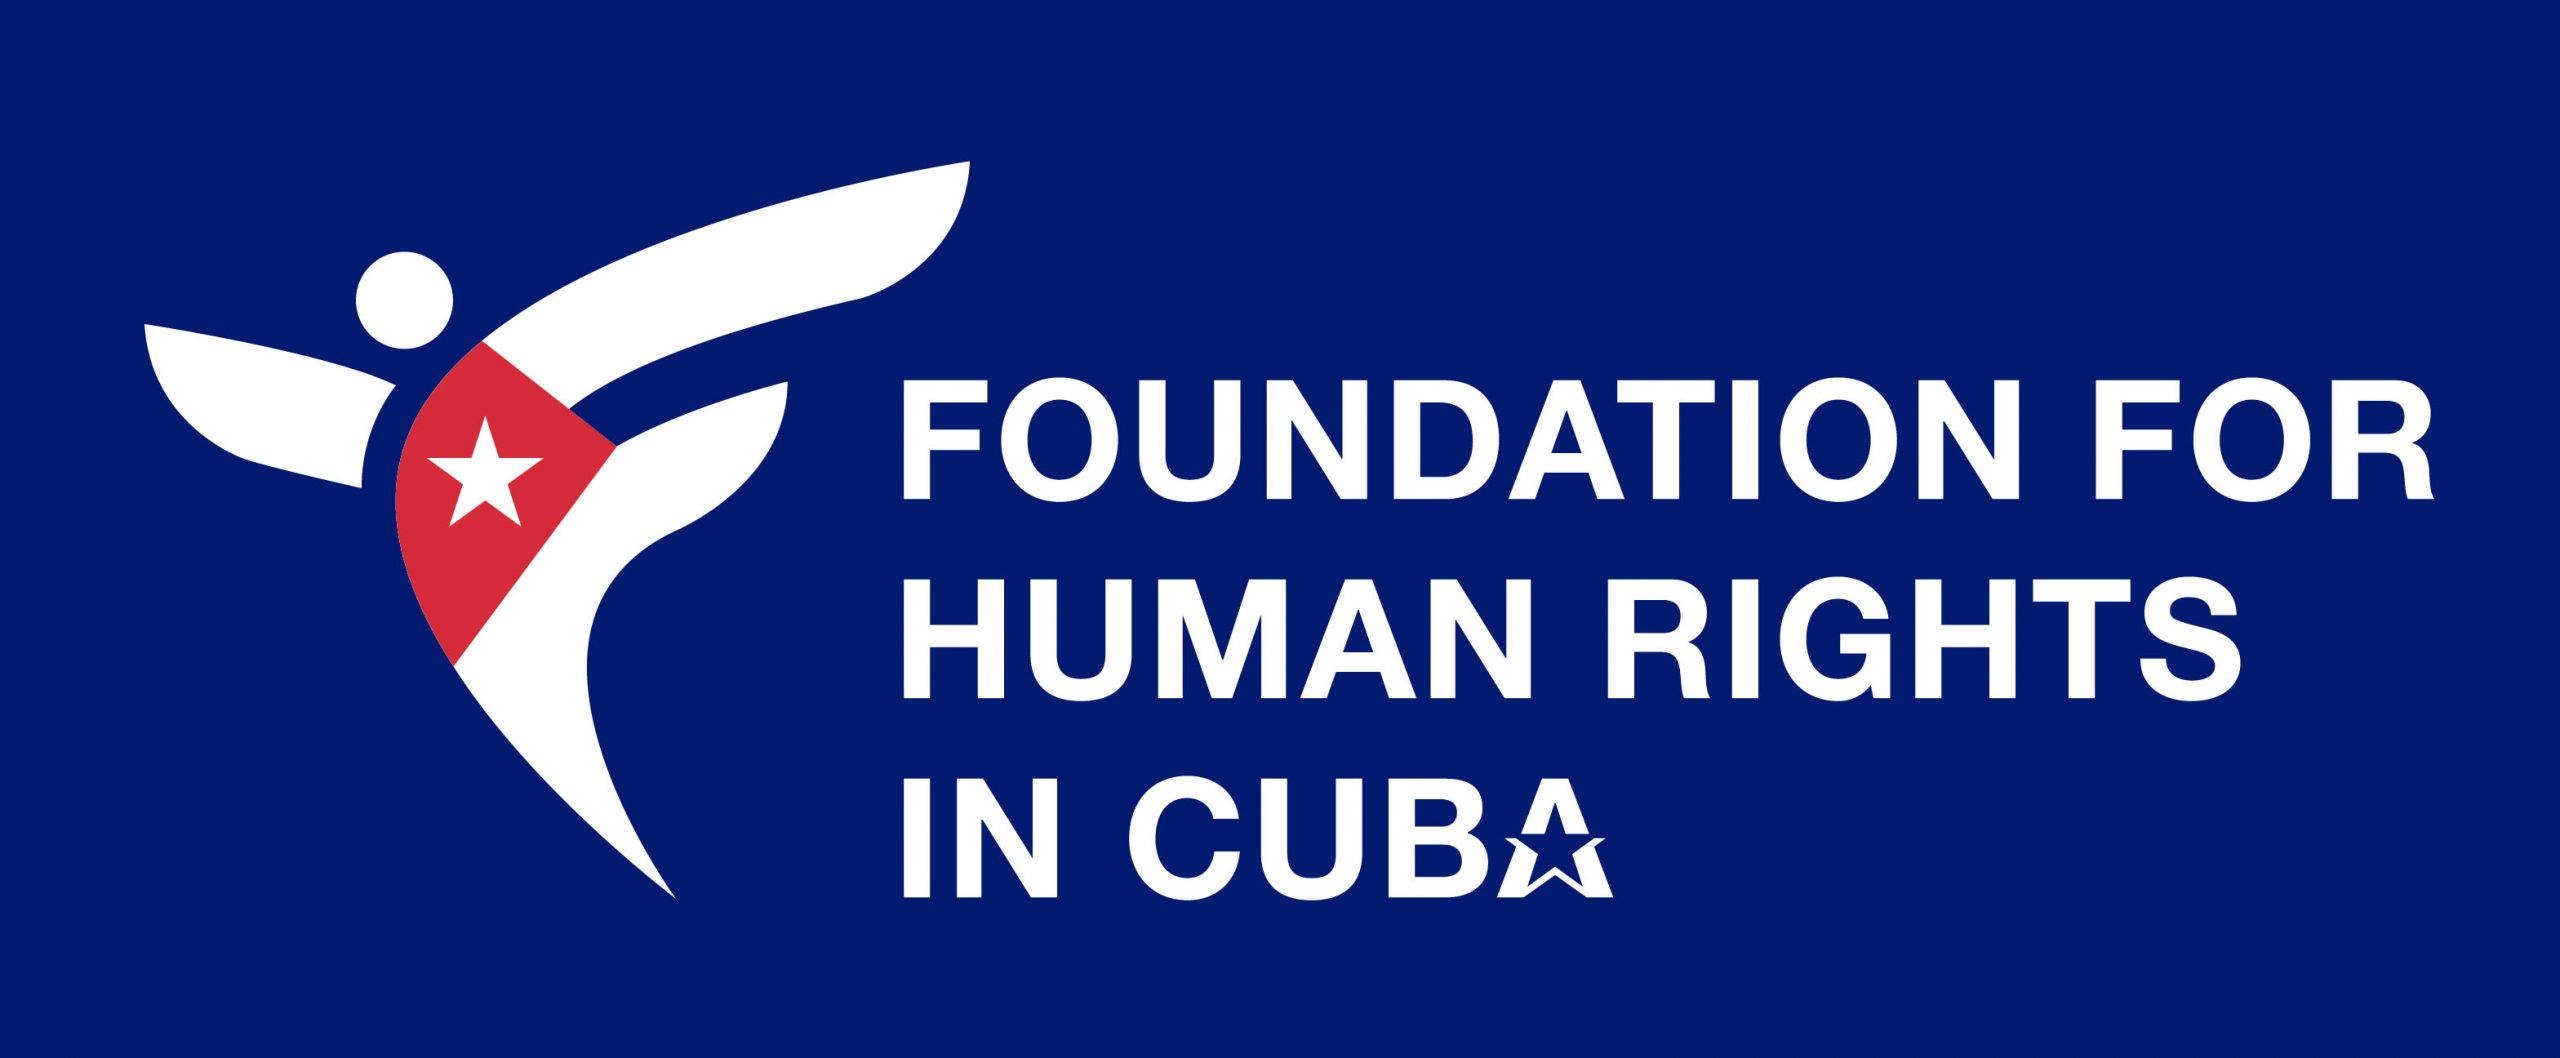 Foundation for Human Rights in Cuba